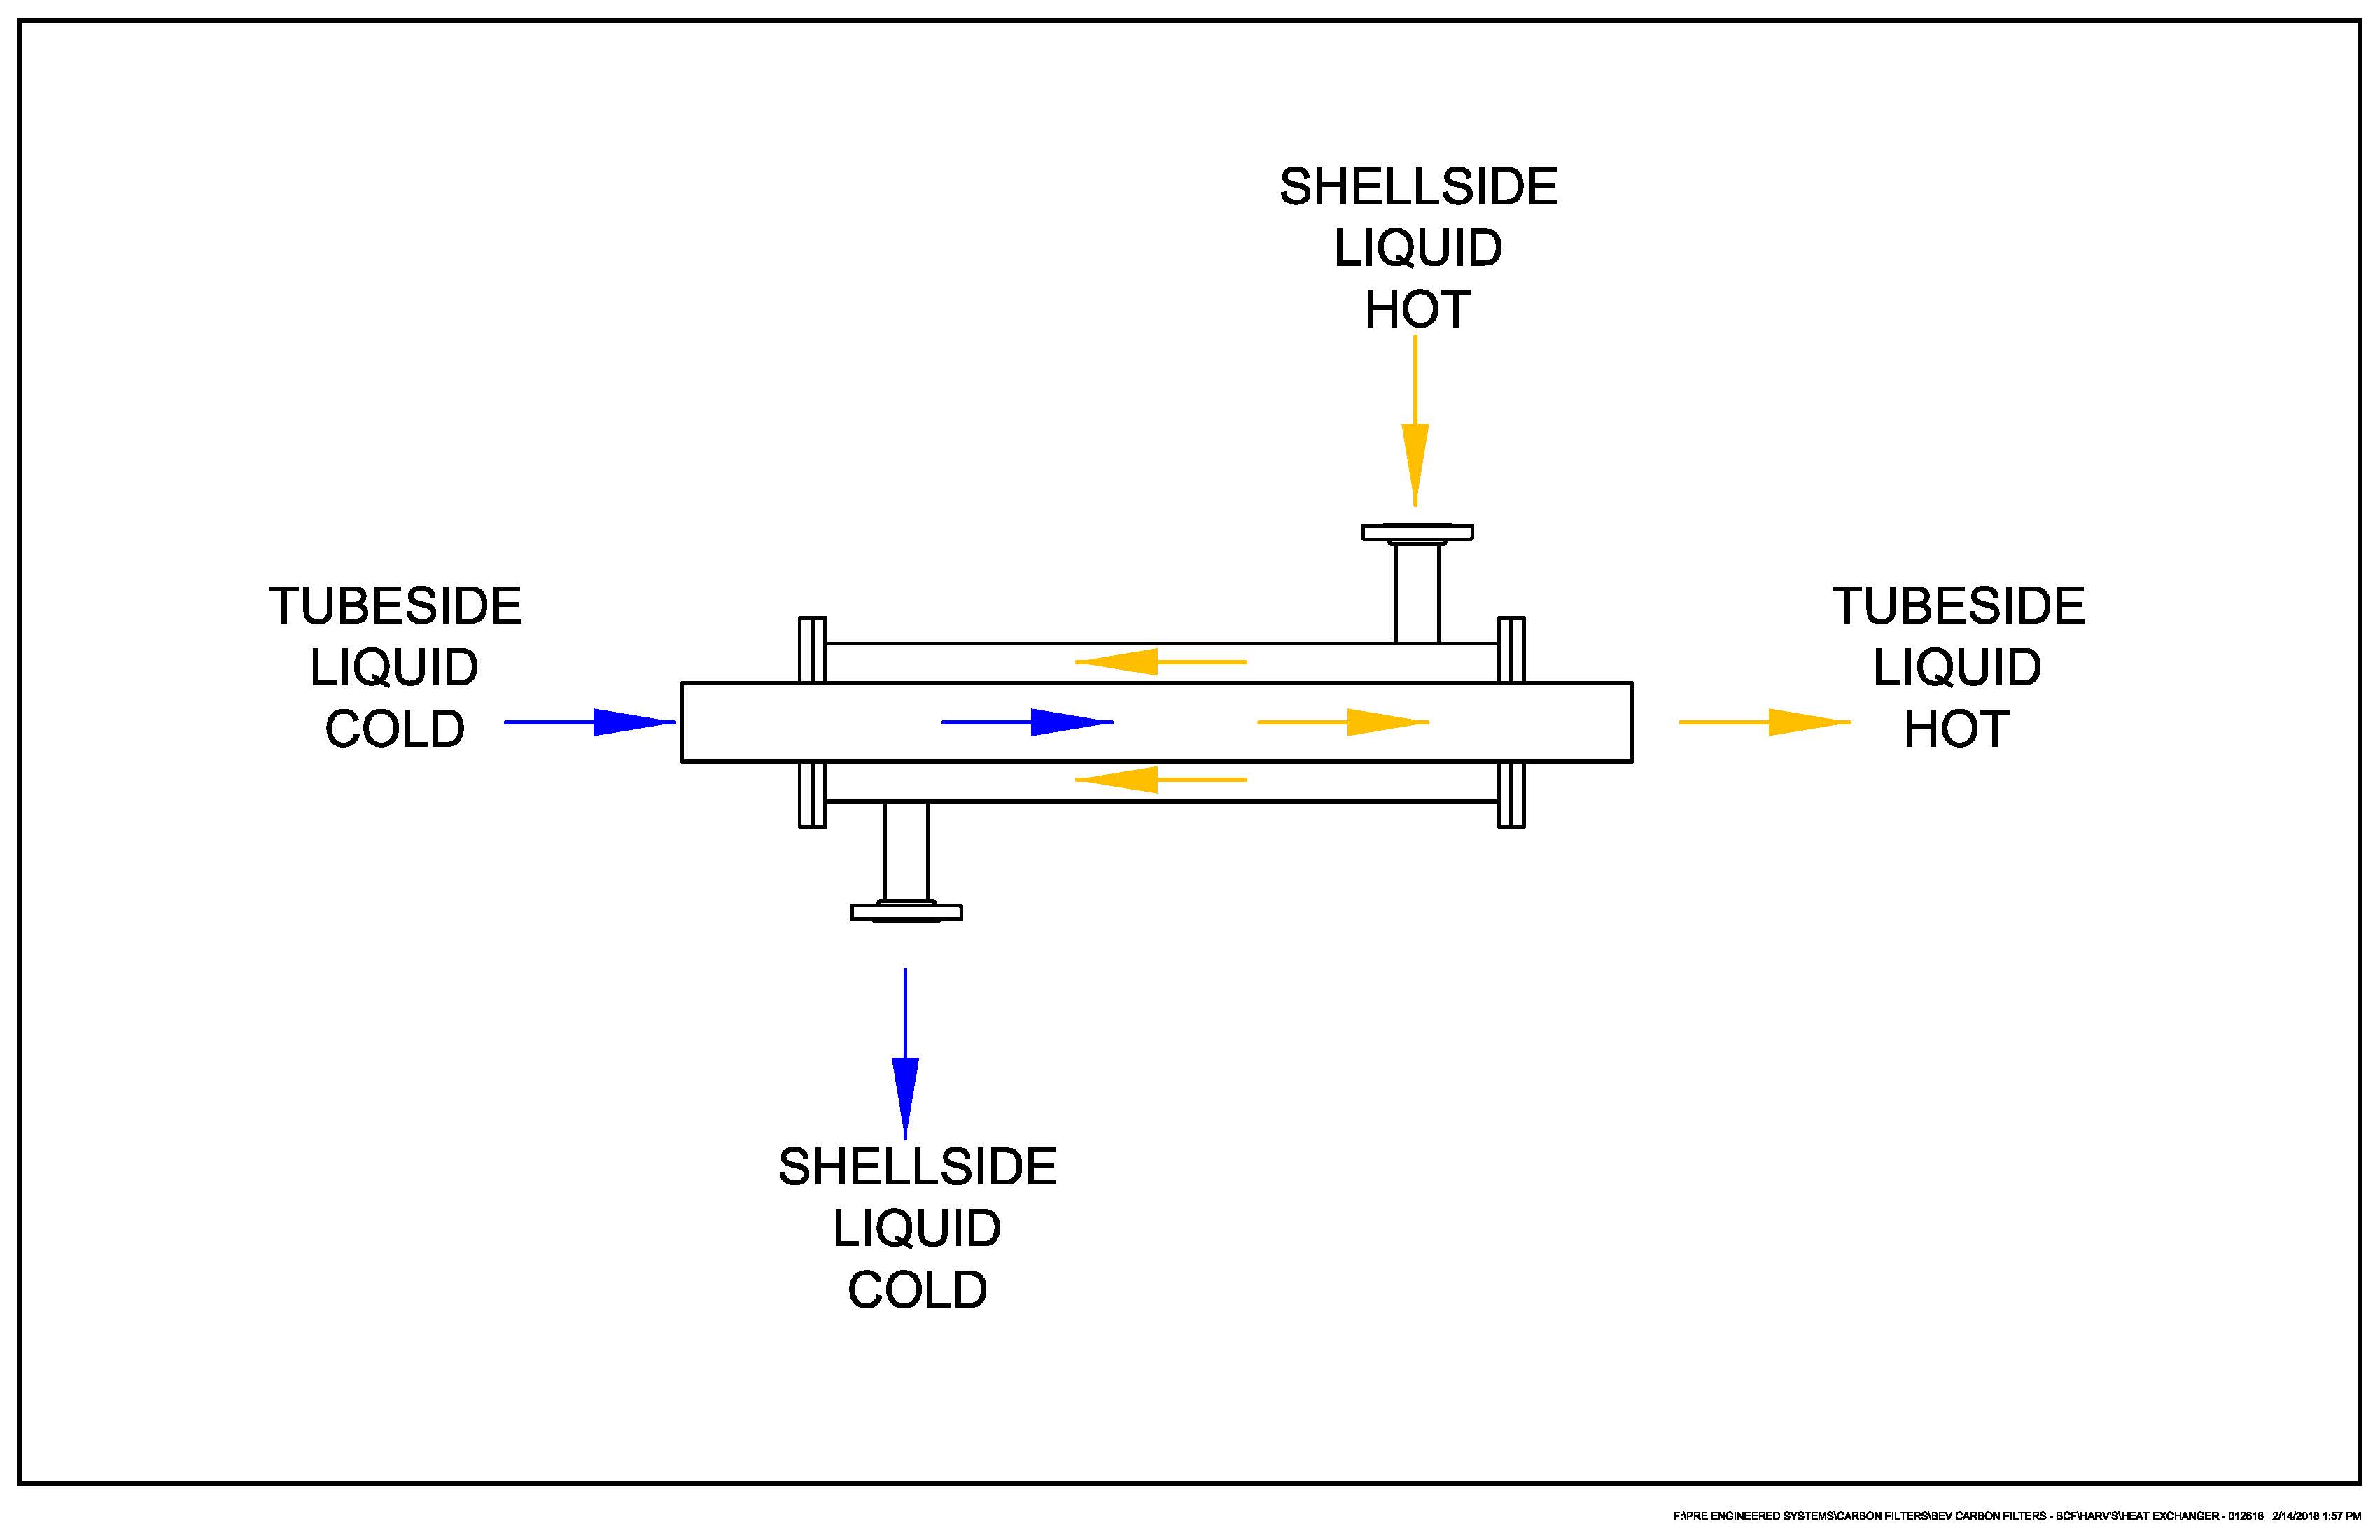 [DIAGRAM] Shell And Tube Heat Exchanger Diagram - MYDIAGRAM.ONLINE